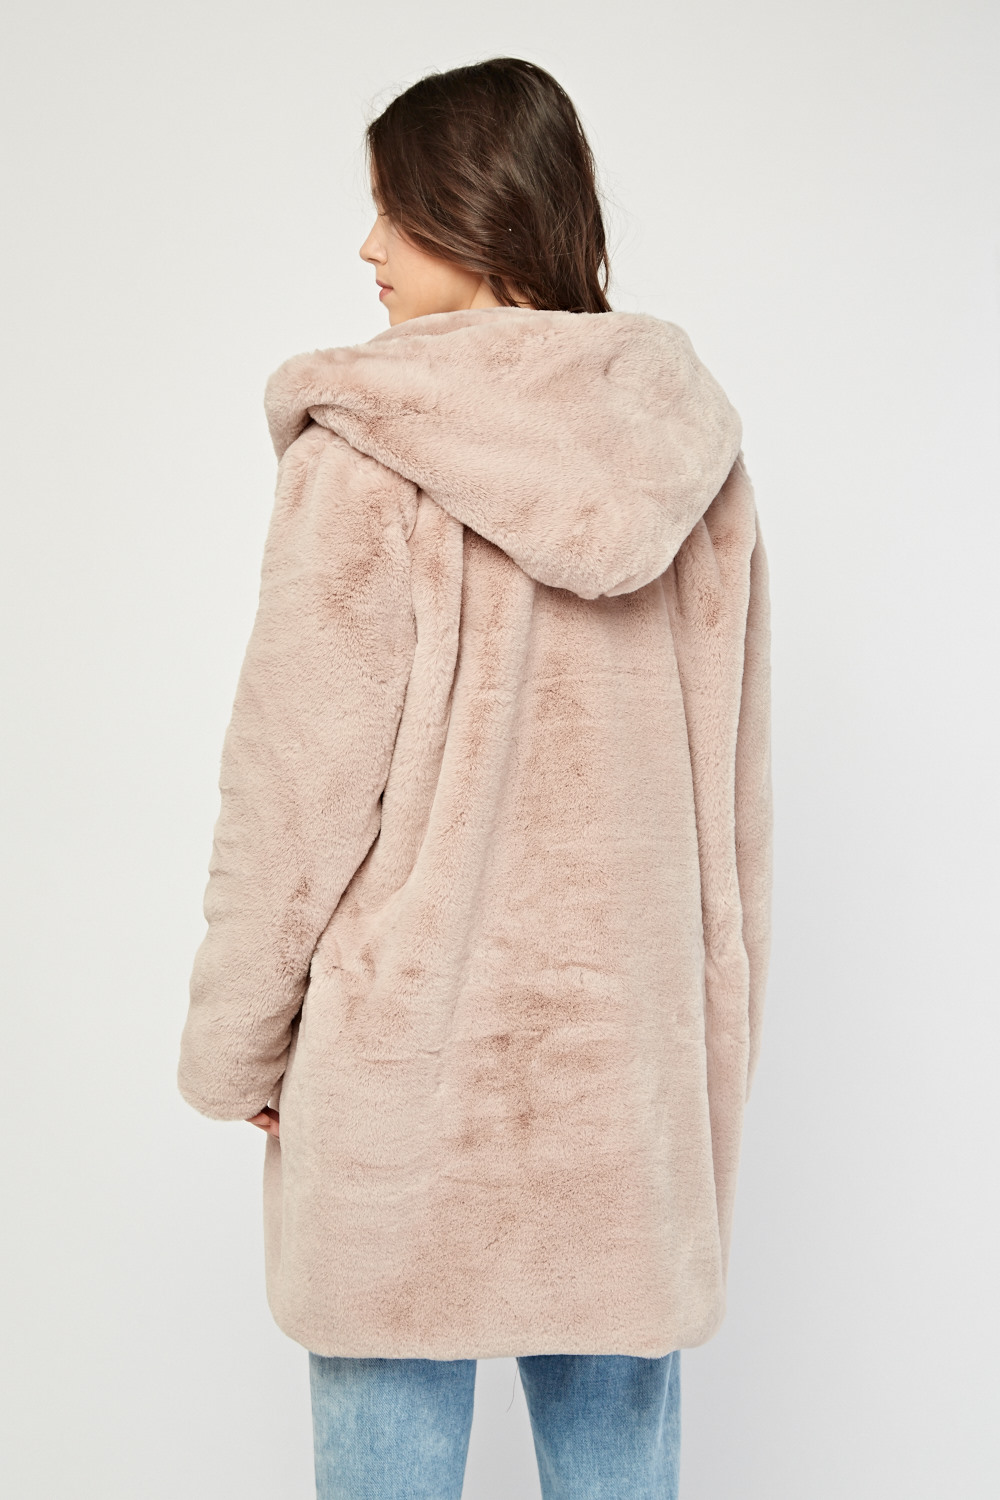 Apricot Faux Fur Hooded Coat - Limited edition | Discount Designer Stock